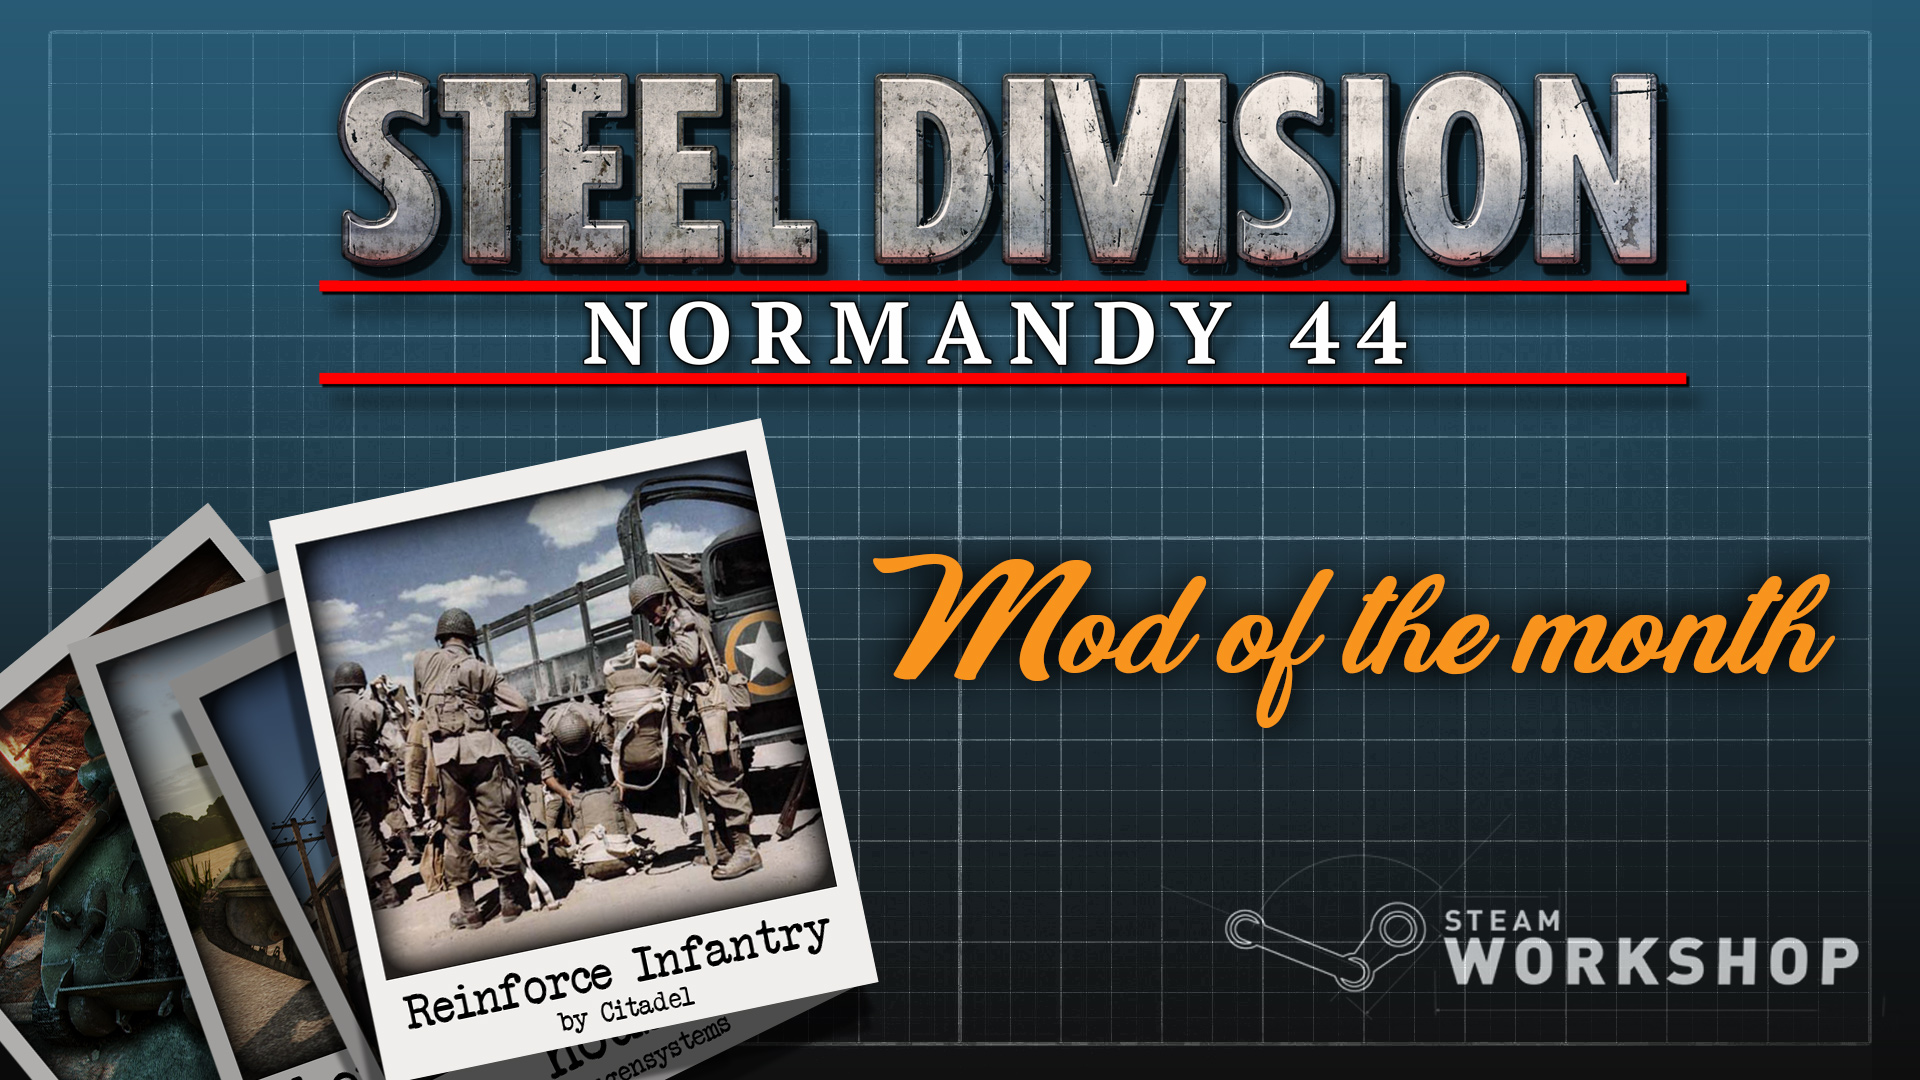 Steel Division: Normandy 44 Reinforce Infantry